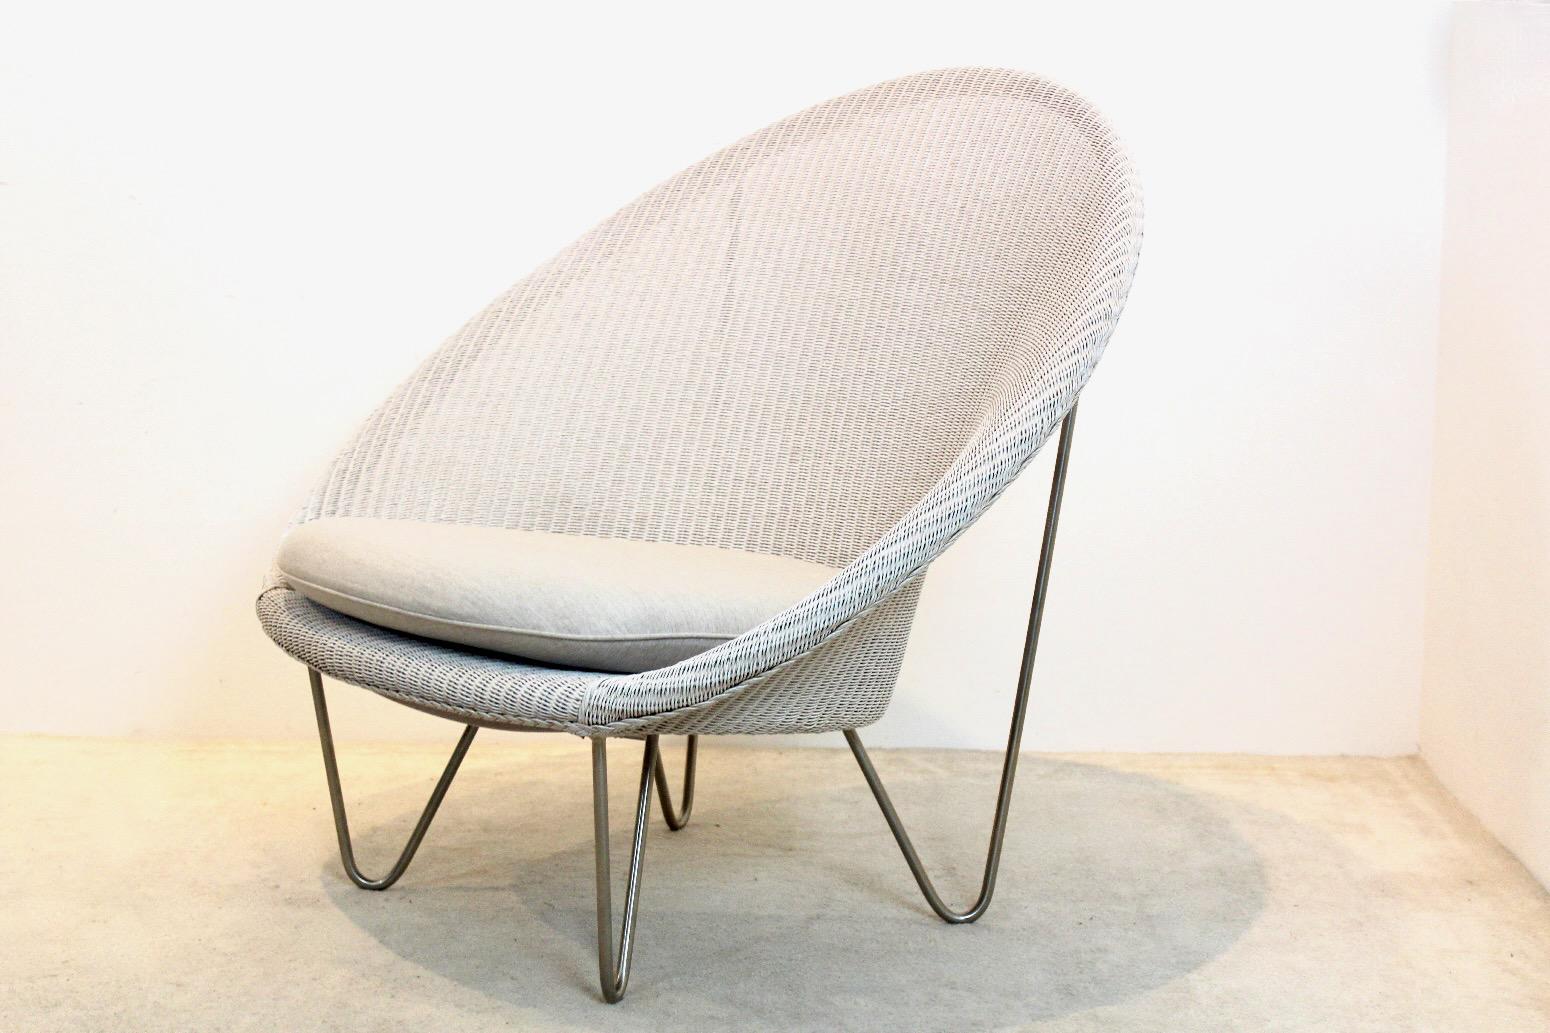 Fantastic Lloyd Loom lounge chair in greyish white original Lloyd loom weave. The chair has a stable base made of brushed nickel steel base. The Lloyd loom weave is very strong and comfortable. The chair is specially made for comfort and folds